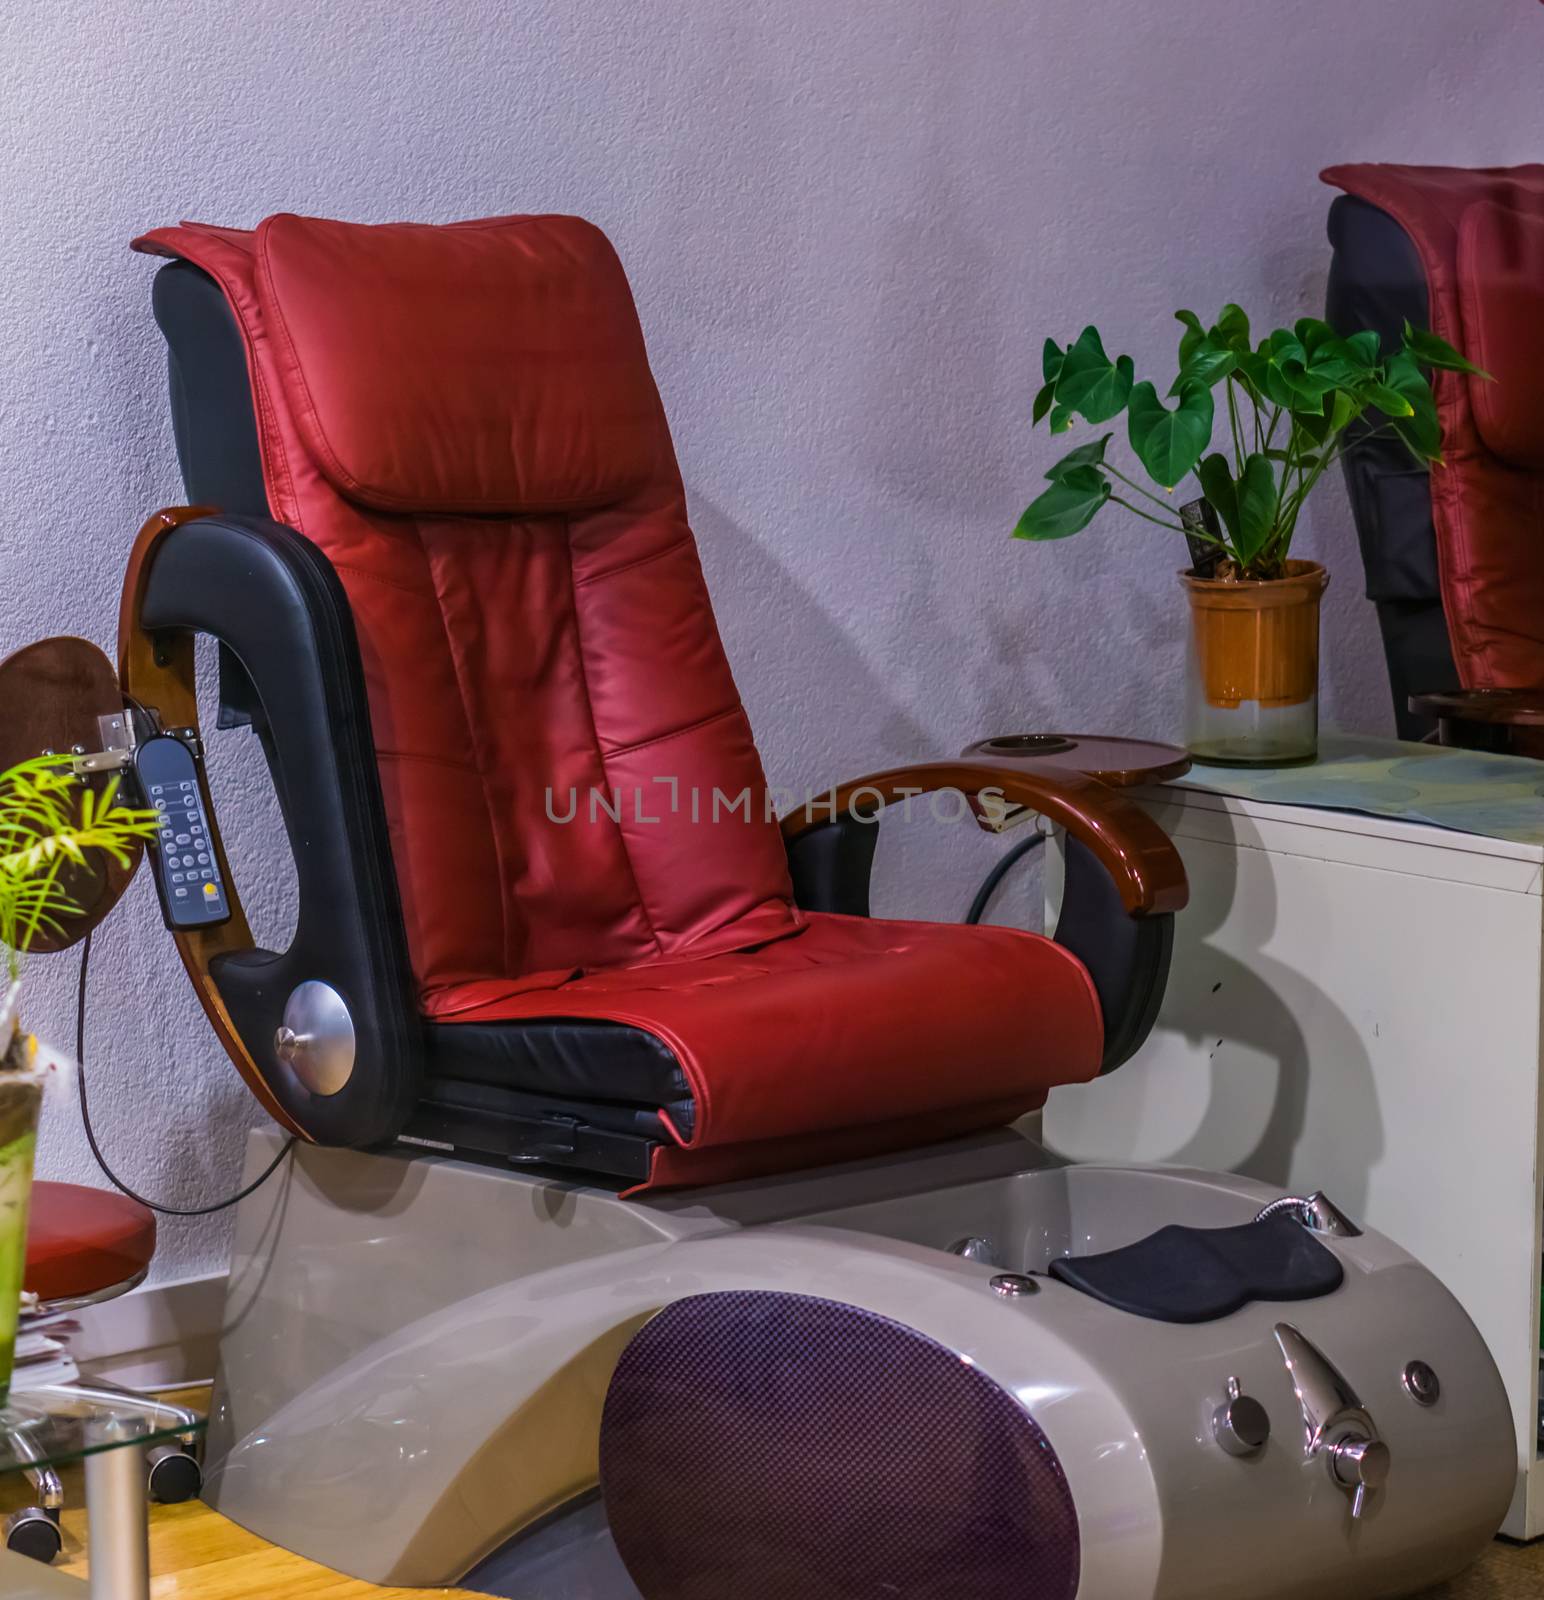 luxurious massage chair, therapeutic or wellness equipment, relaxation and healthcare